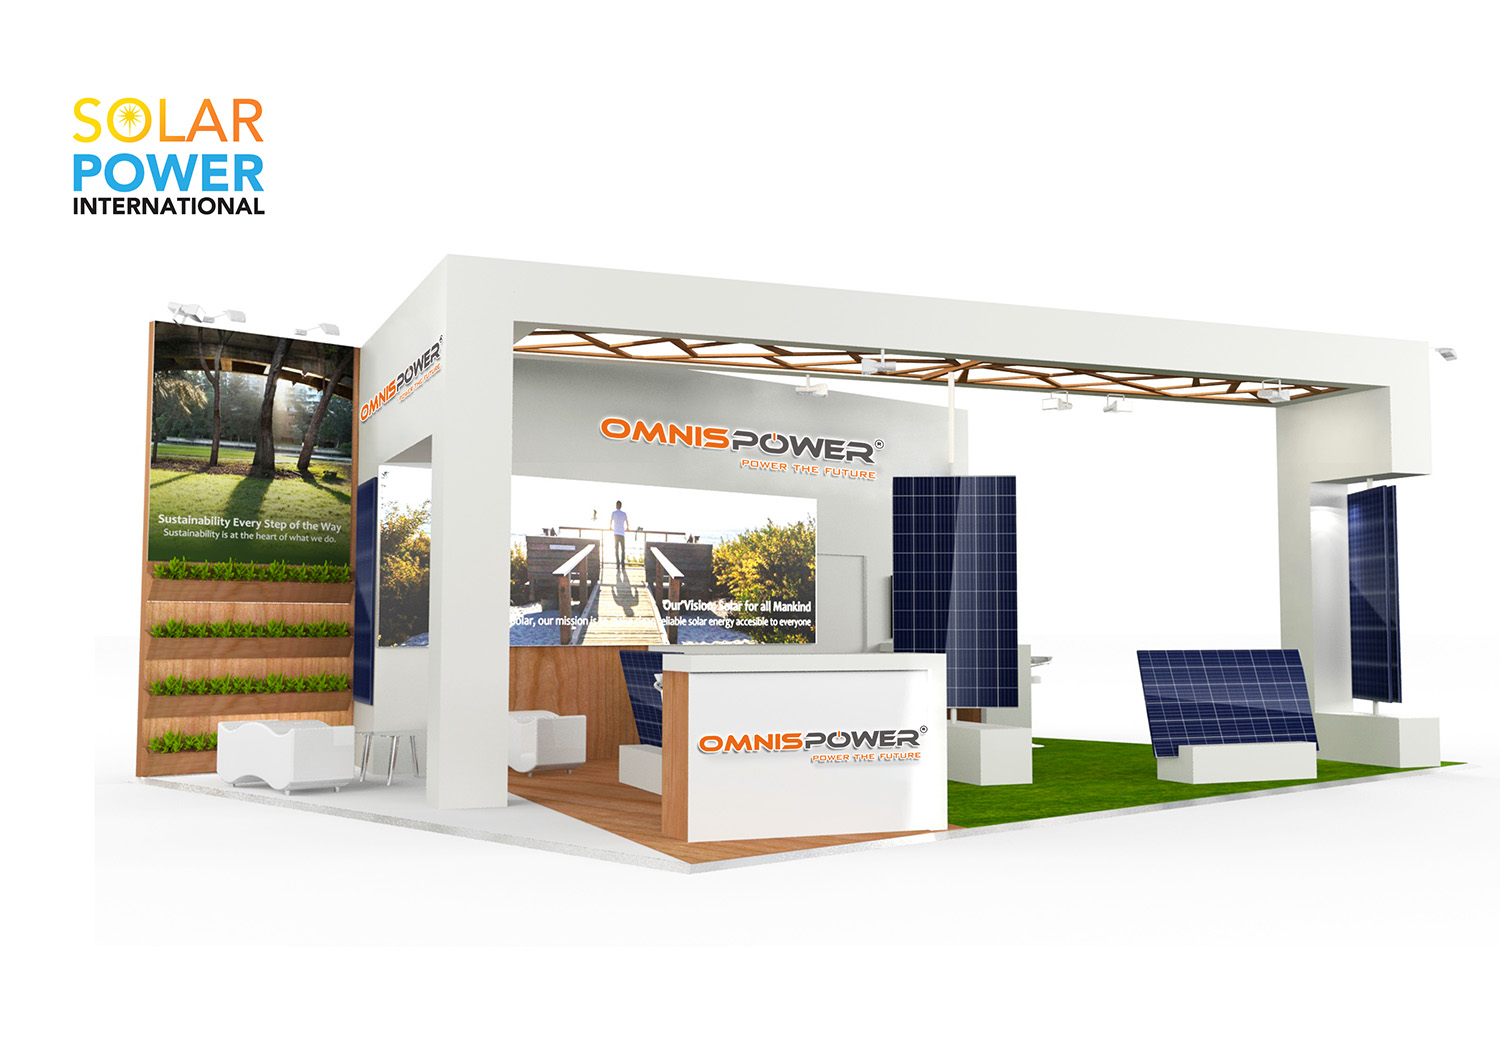 FIND US IN SOALR POWER NORTH AMERICA EXHIBITION IN SALT LAKE CITY, USA